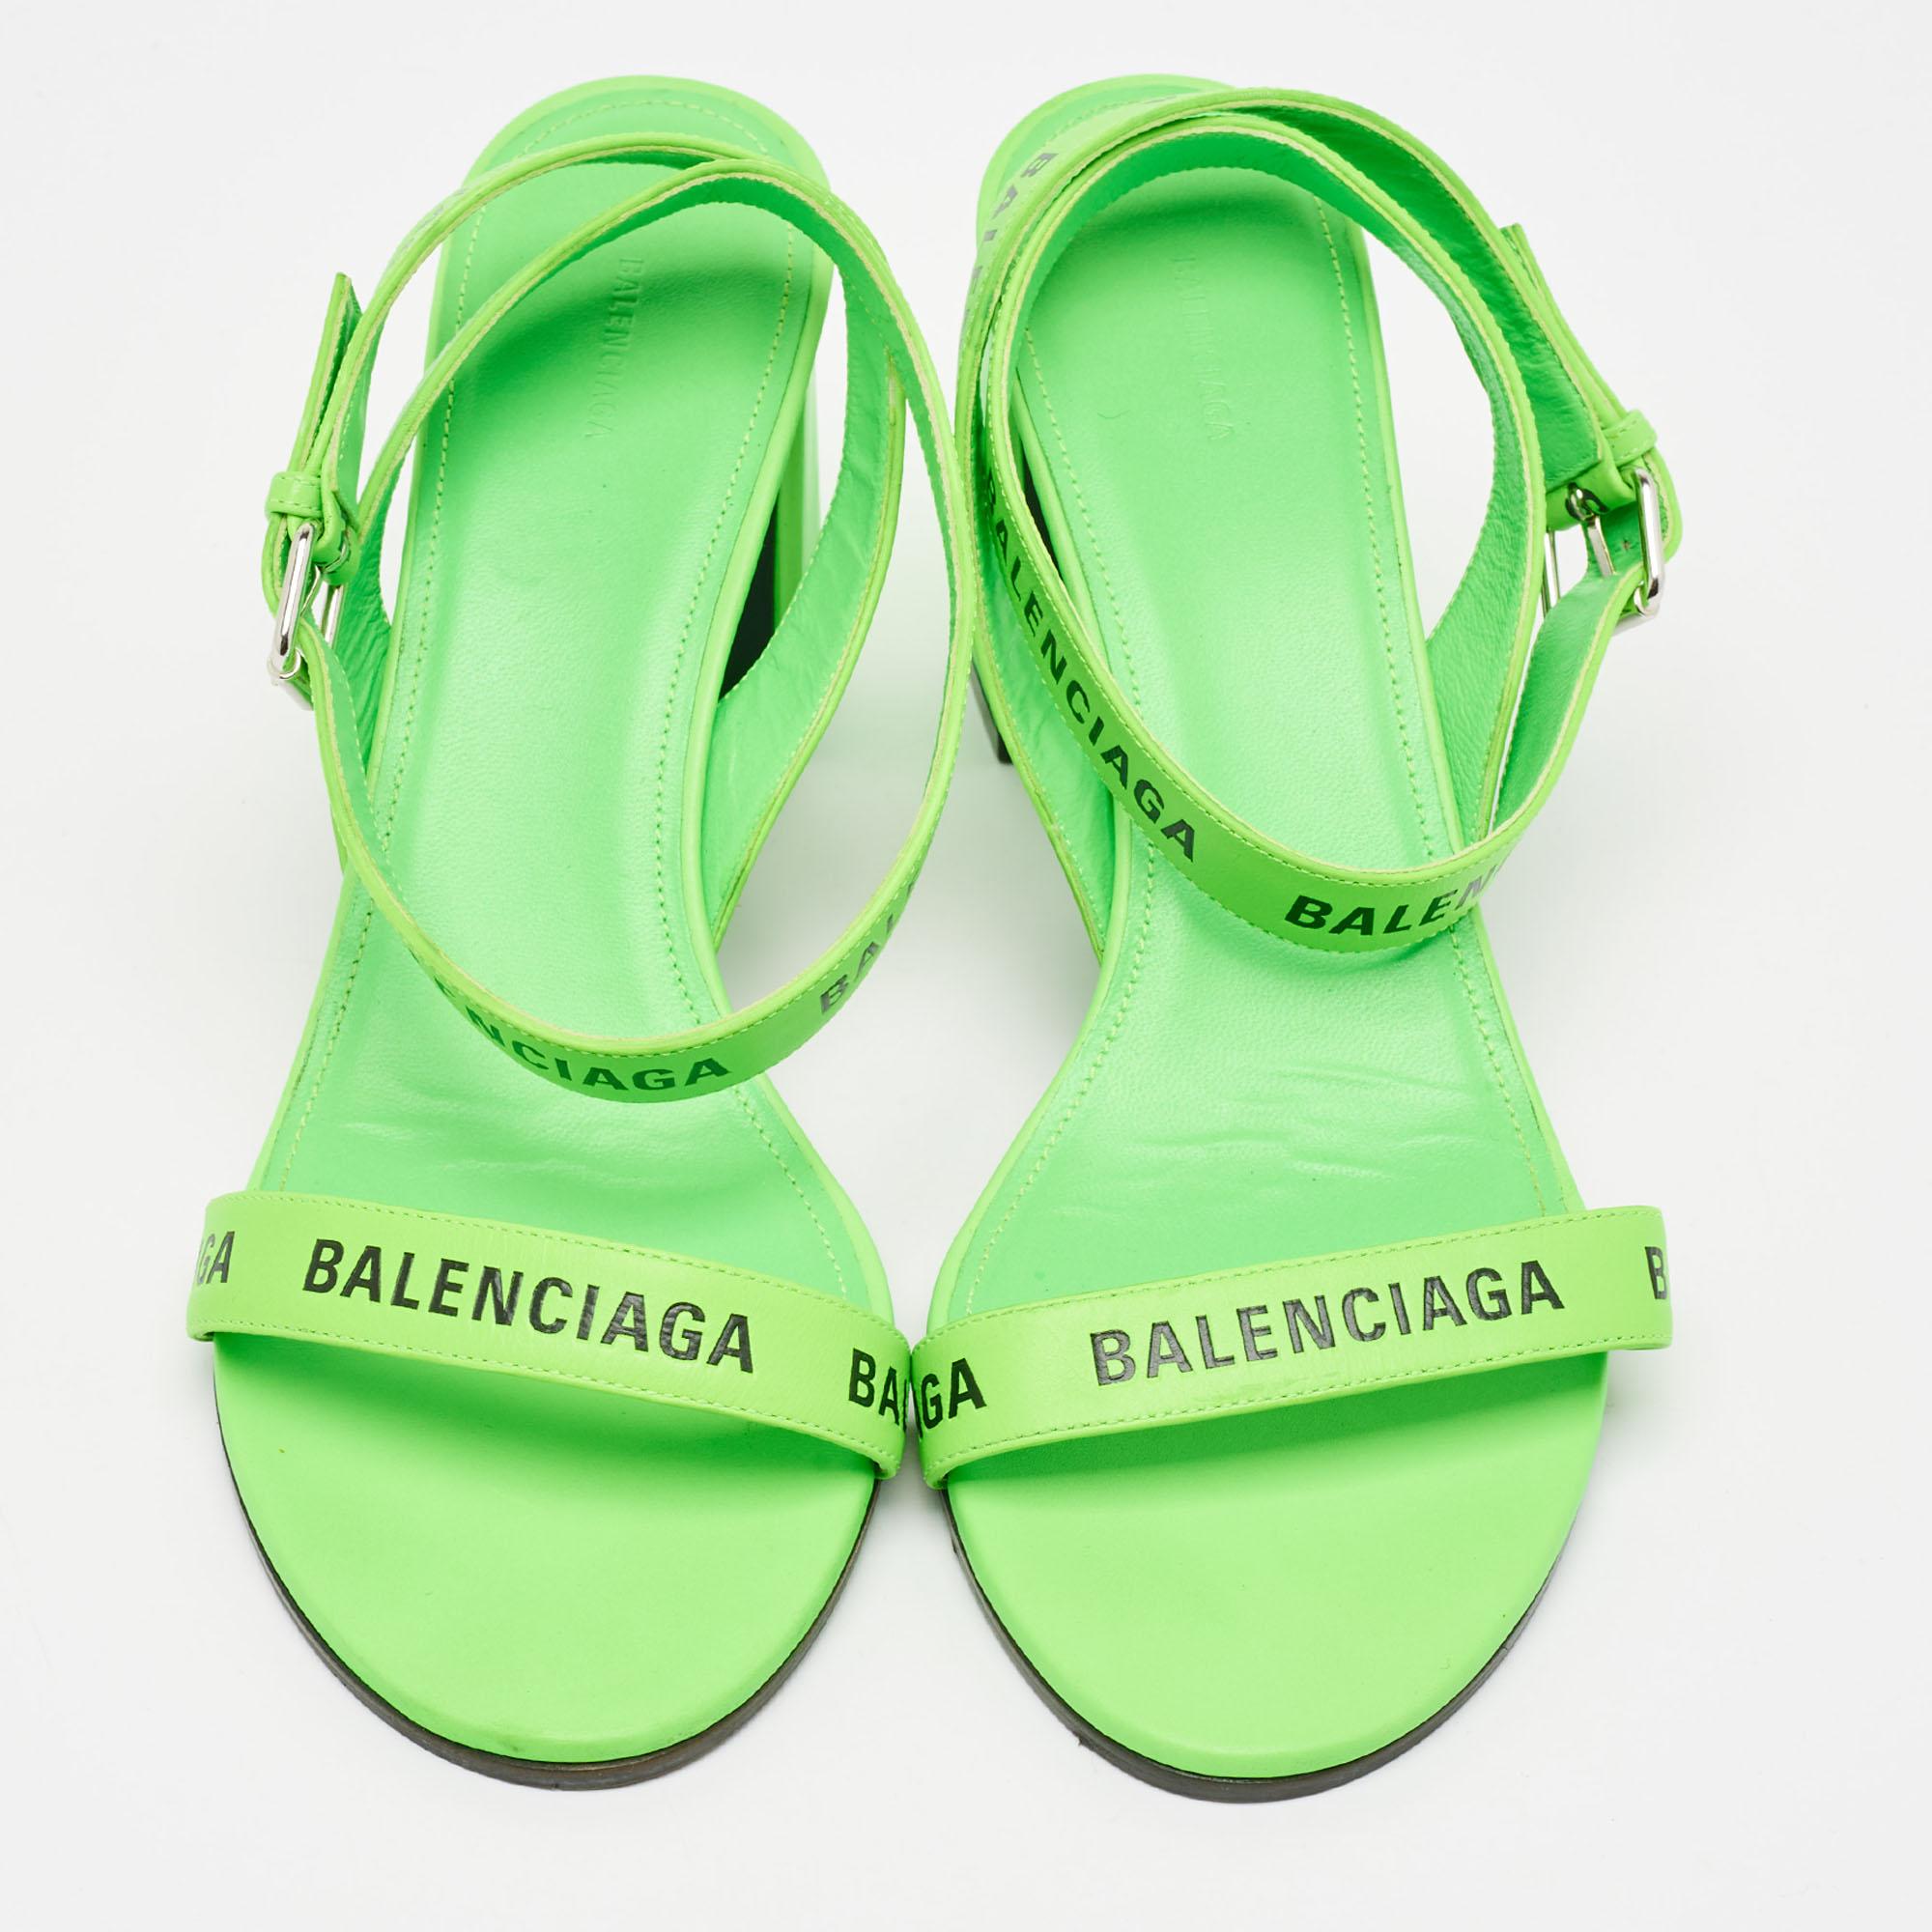 Make a statement with these Balenciaga sandals for women. Impeccably crafted, these chic heels offer both fashion and comfort, elevating your look with each graceful step.

Includes
Original Box, Info Booklet